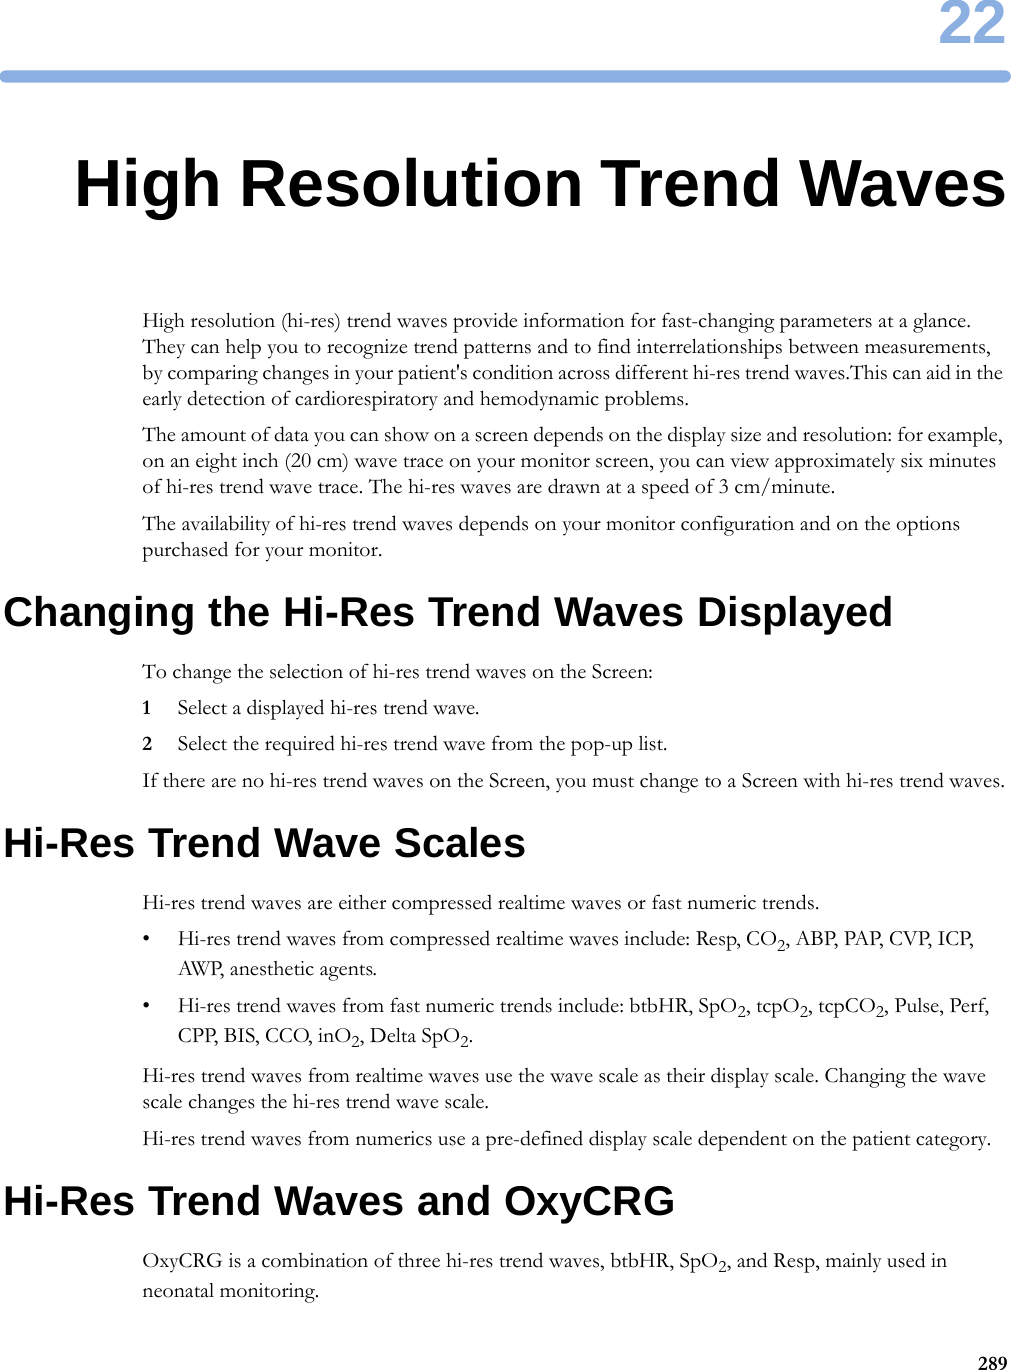 2228922High Resolution Trend WavesHigh resolution (hi-res) trend waves provide information for fast-changing parameters at a glance. They can help you to recognize trend patterns and to find interrelationships between measurements, by comparing changes in your patient&apos;s condition across different hi-res trend waves.This can aid in the early detection of cardiorespiratory and hemodynamic problems.The amount of data you can show on a screen depends on the display size and resolution: for example, on an eight inch (20 cm) wave trace on your monitor screen, you can view approximately six minutes of hi-res trend wave trace. The hi-res waves are drawn at a speed of 3 cm/minute.The availability of hi-res trend waves depends on your monitor configuration and on the options purchased for your monitor.Changing the Hi-Res Trend Waves DisplayedTo change the selection of hi-res trend waves on the Screen:1Select a displayed hi-res trend wave.2Select the required hi-res trend wave from the pop-up list.If there are no hi-res trend waves on the Screen, you must change to a Screen with hi-res trend waves.Hi-Res Trend Wave ScalesHi-res trend waves are either compressed realtime waves or fast numeric trends.• Hi-res trend waves from compressed realtime waves include: Resp, CO2, AB P,  PAP, CV P,  ICP, AWP, anesthetic agents.• Hi-res trend waves from fast numeric trends include: btbHR, SpO2, tcpO2, tcpCO2, Pulse, Perf, CPP, BIS, CCO, inO2, Delta SpO2.Hi-res trend waves from realtime waves use the wave scale as their display scale. Changing the wave scale changes the hi-res trend wave scale.Hi-res trend waves from numerics use a pre-defined display scale dependent on the patient category.Hi-Res Trend Waves and OxyCRGOxyCRG is a combination of three hi-res trend waves, btbHR, SpO2, and Resp, mainly used in neonatal monitoring.